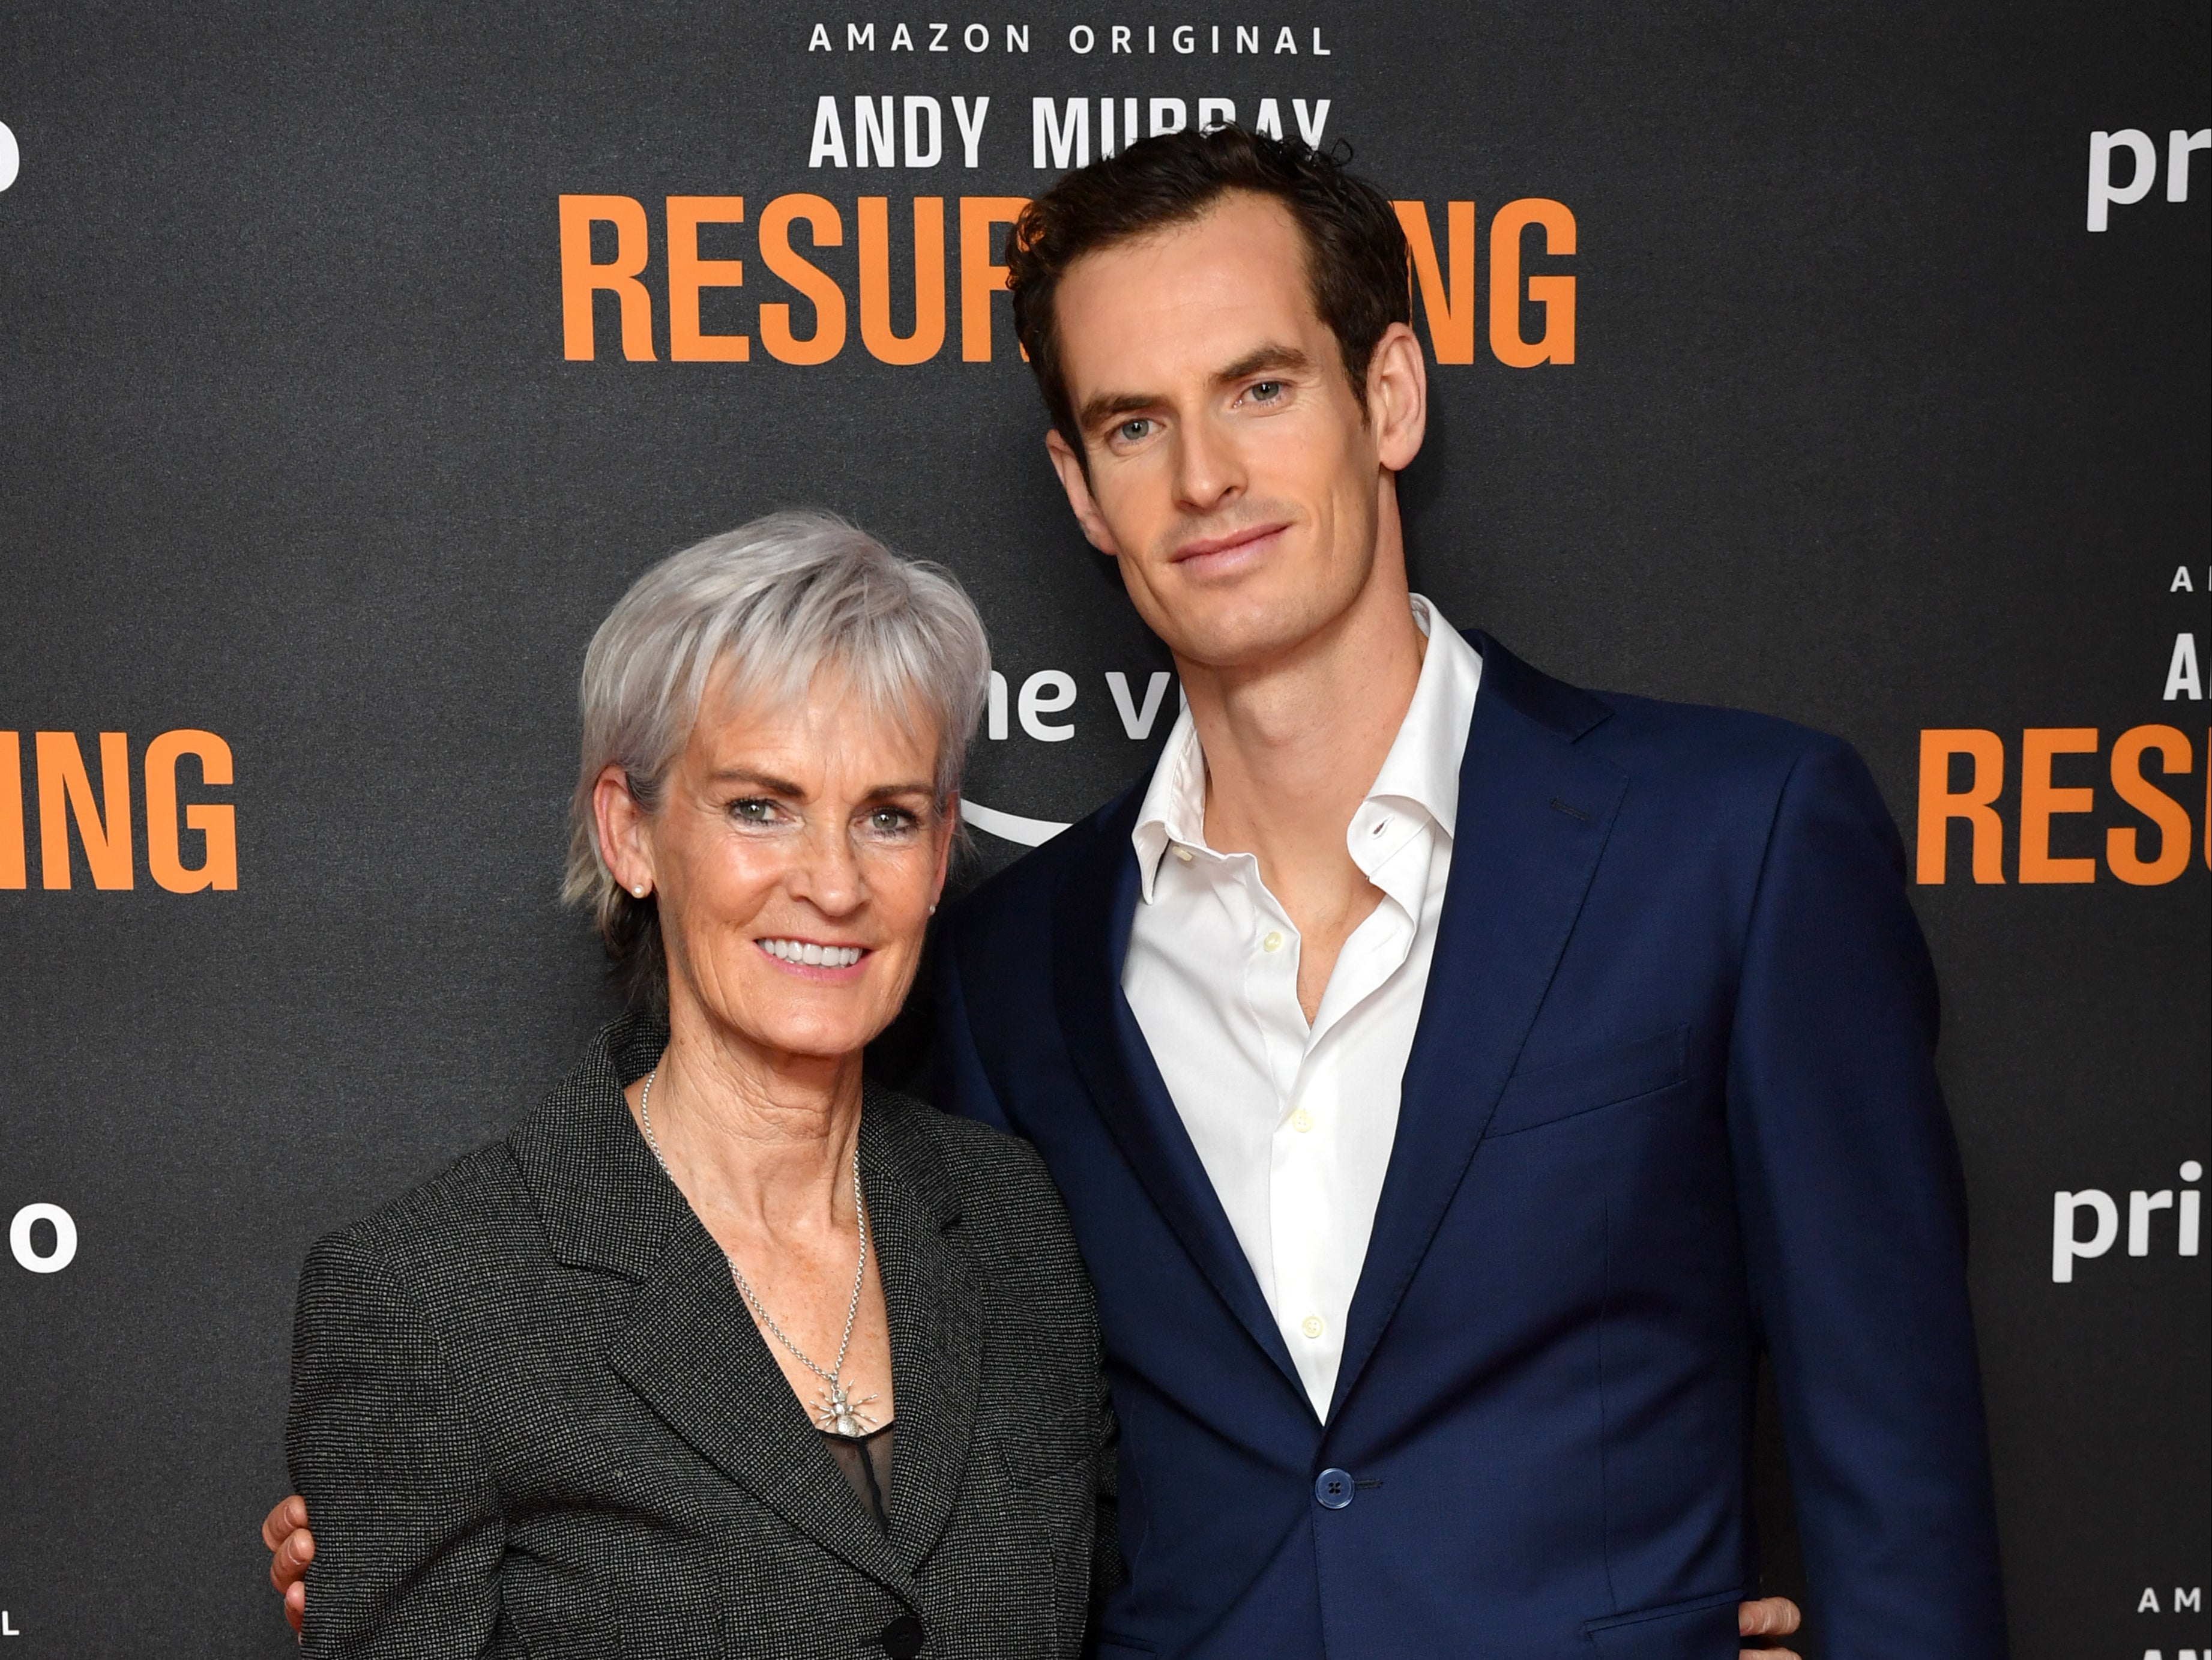 Judy Murray has hit out at the ‘leaking’ of son Andy’s medical information